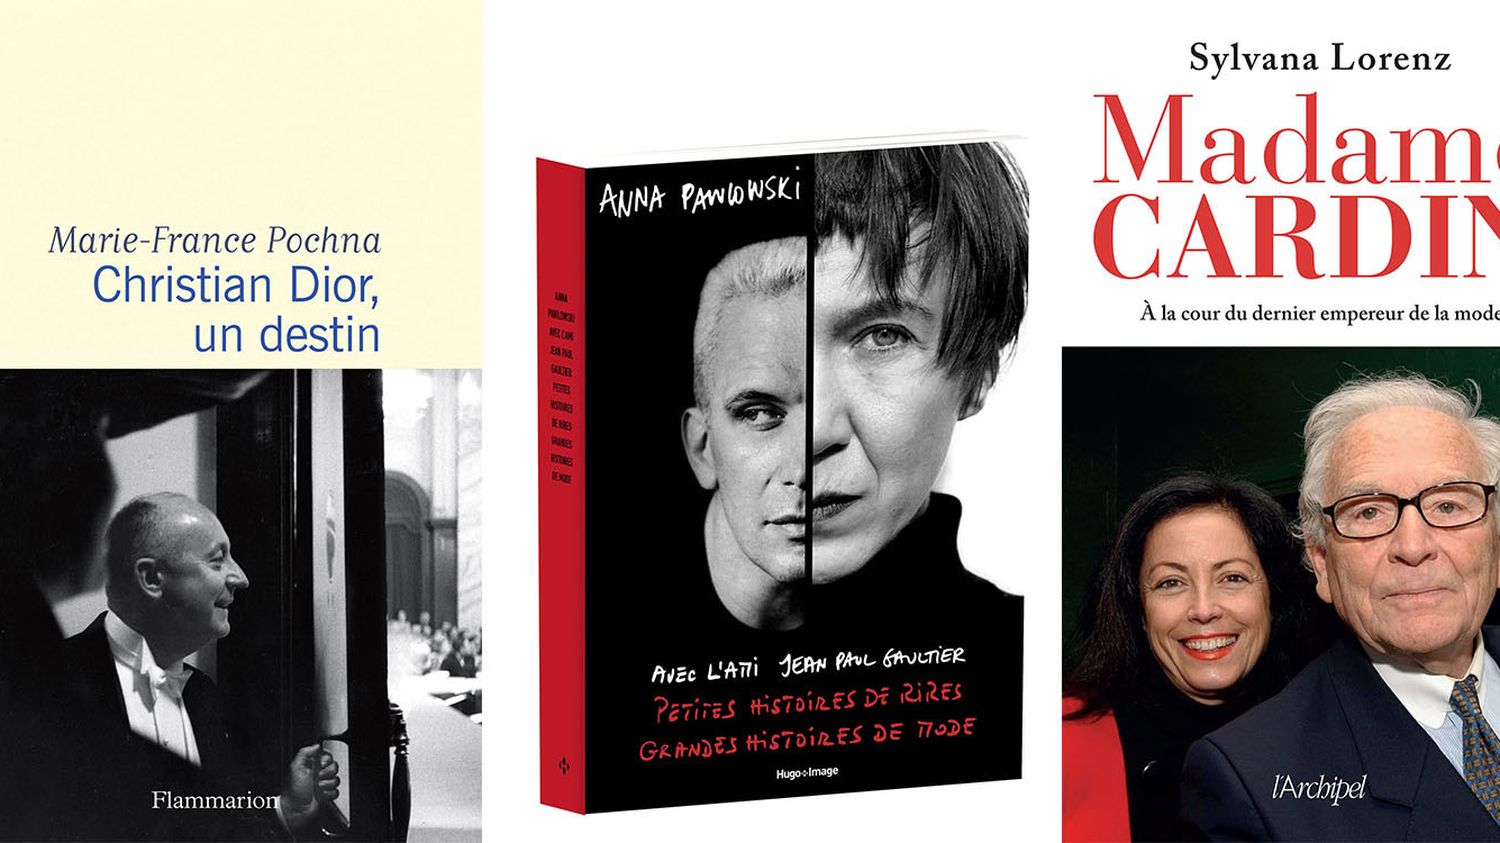 The lives of fashion designers Jean Paul Gaultier, Christian Dior and Pierre Cardin recounted in three books to devour